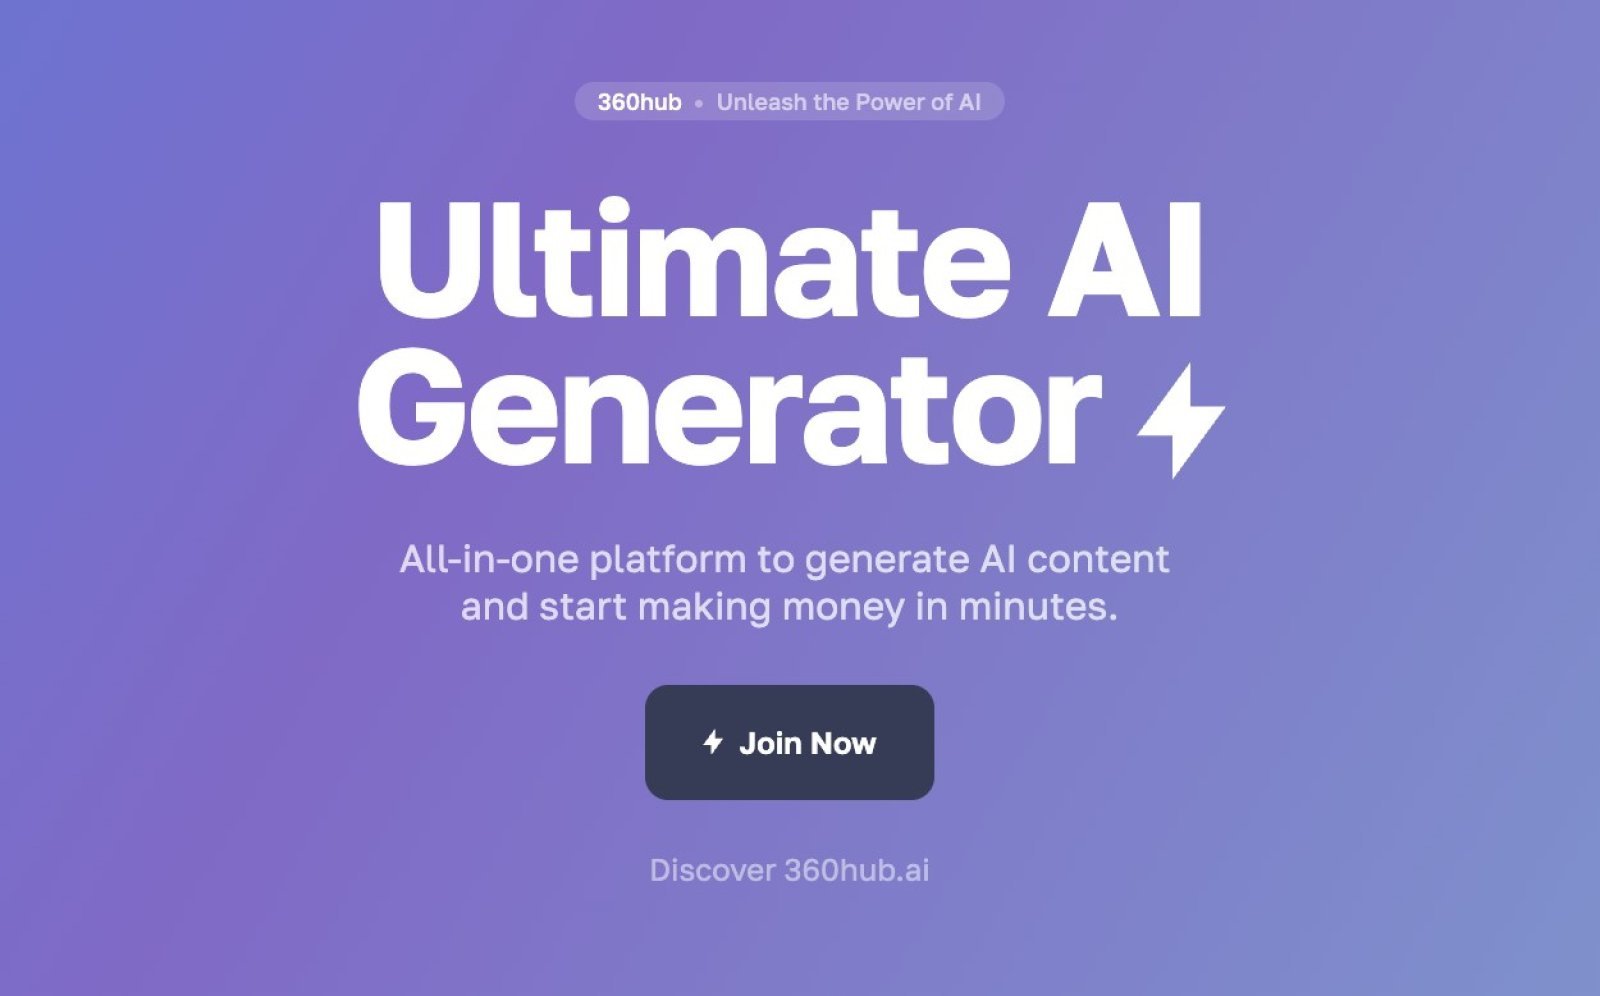 From Pixels to Power: 360Hub.AI Dominates with 5K-7K Daily Users!